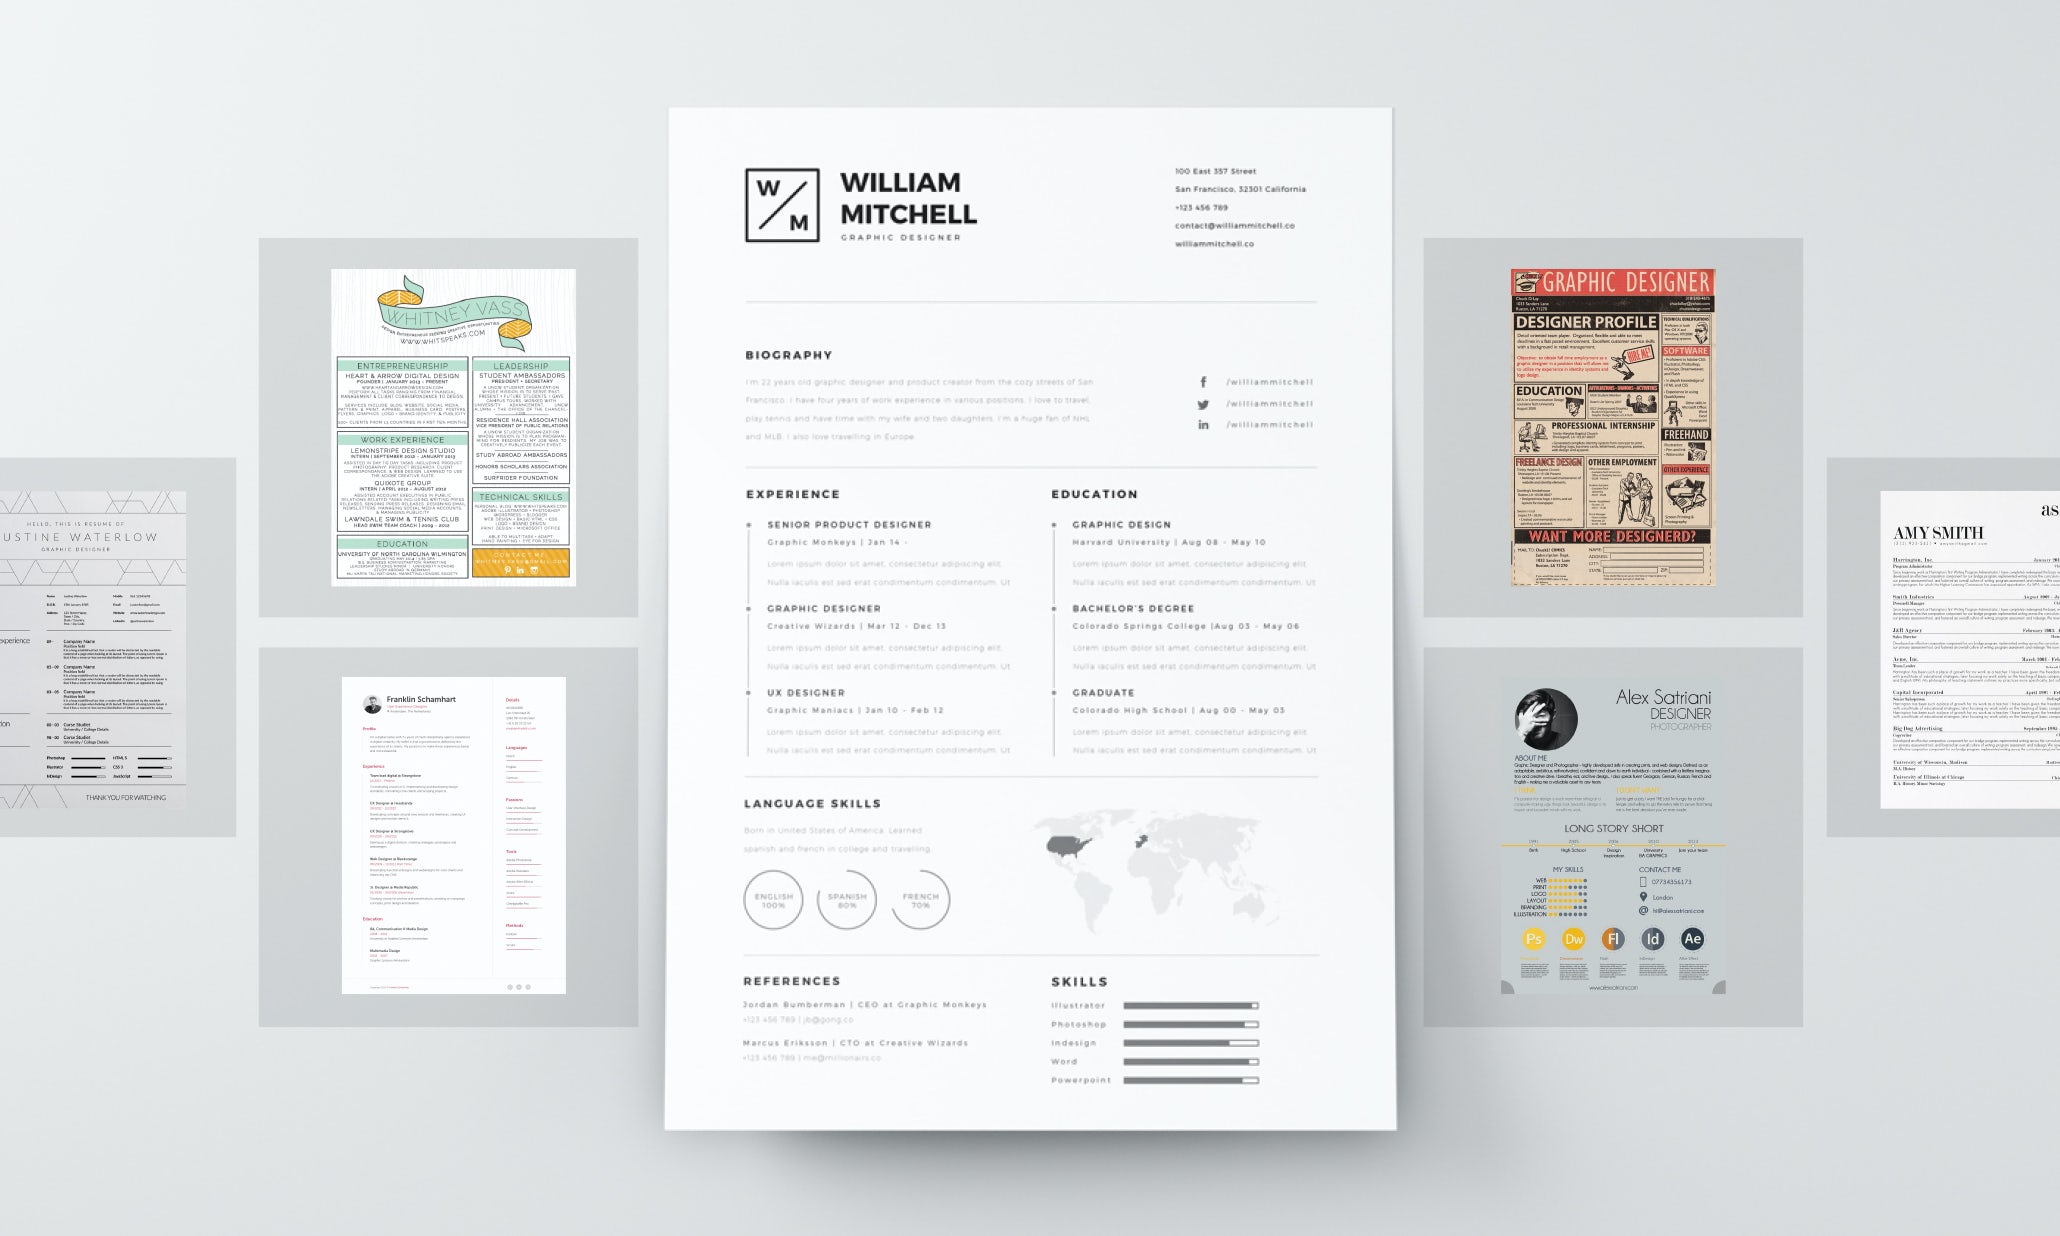 7 resume design principles that will get you hired - 99designs